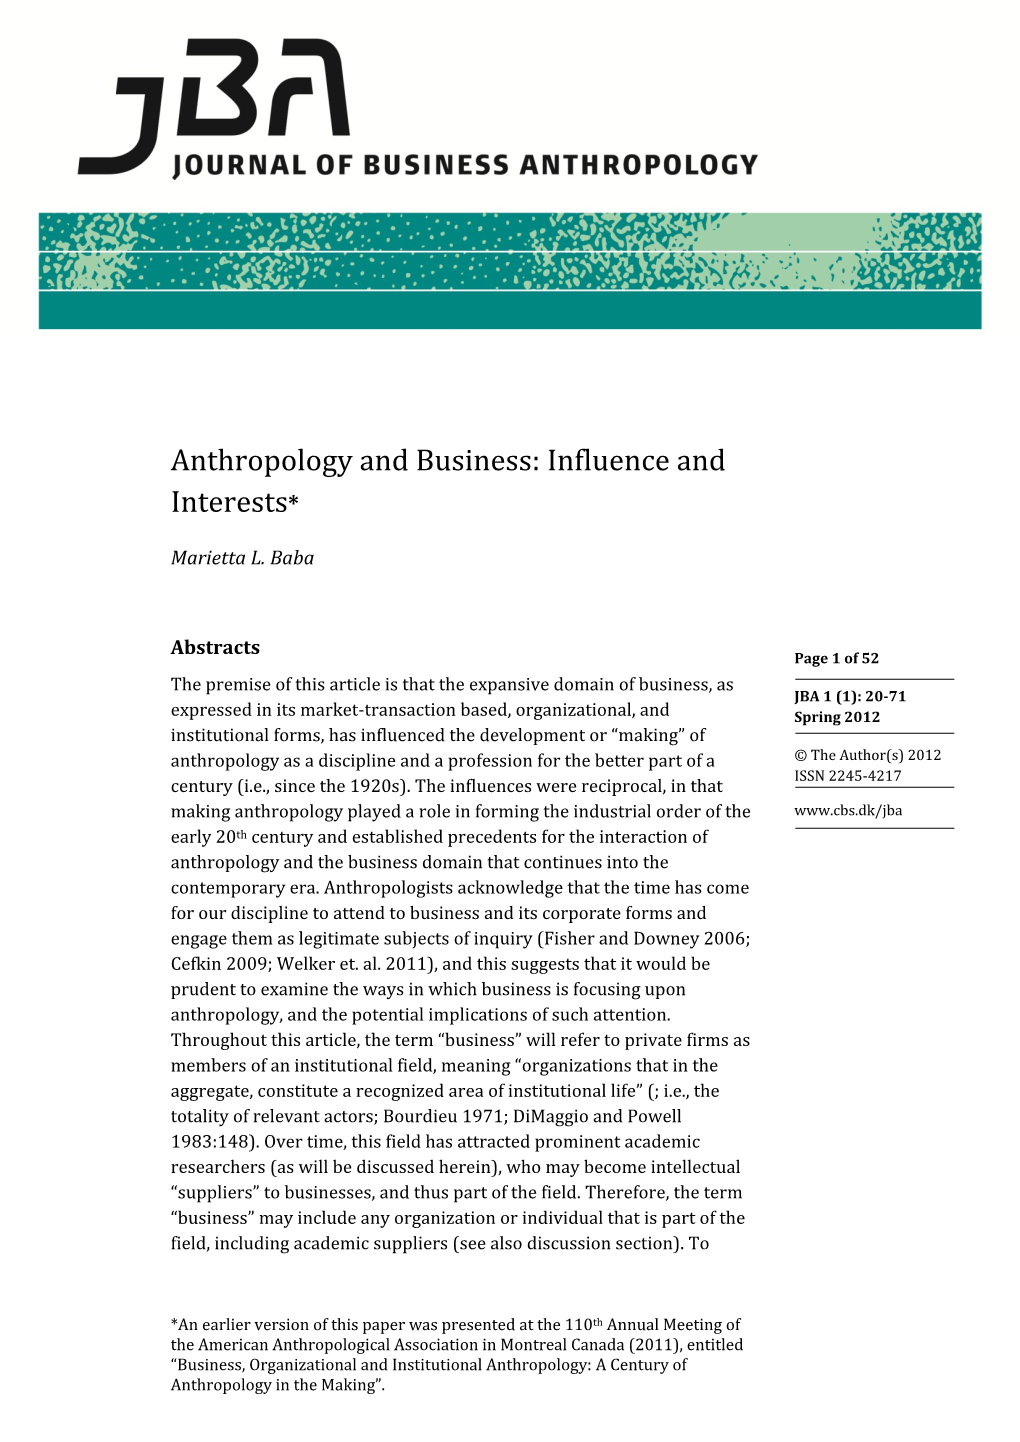 Anthropology and Business: Influence and Interests*